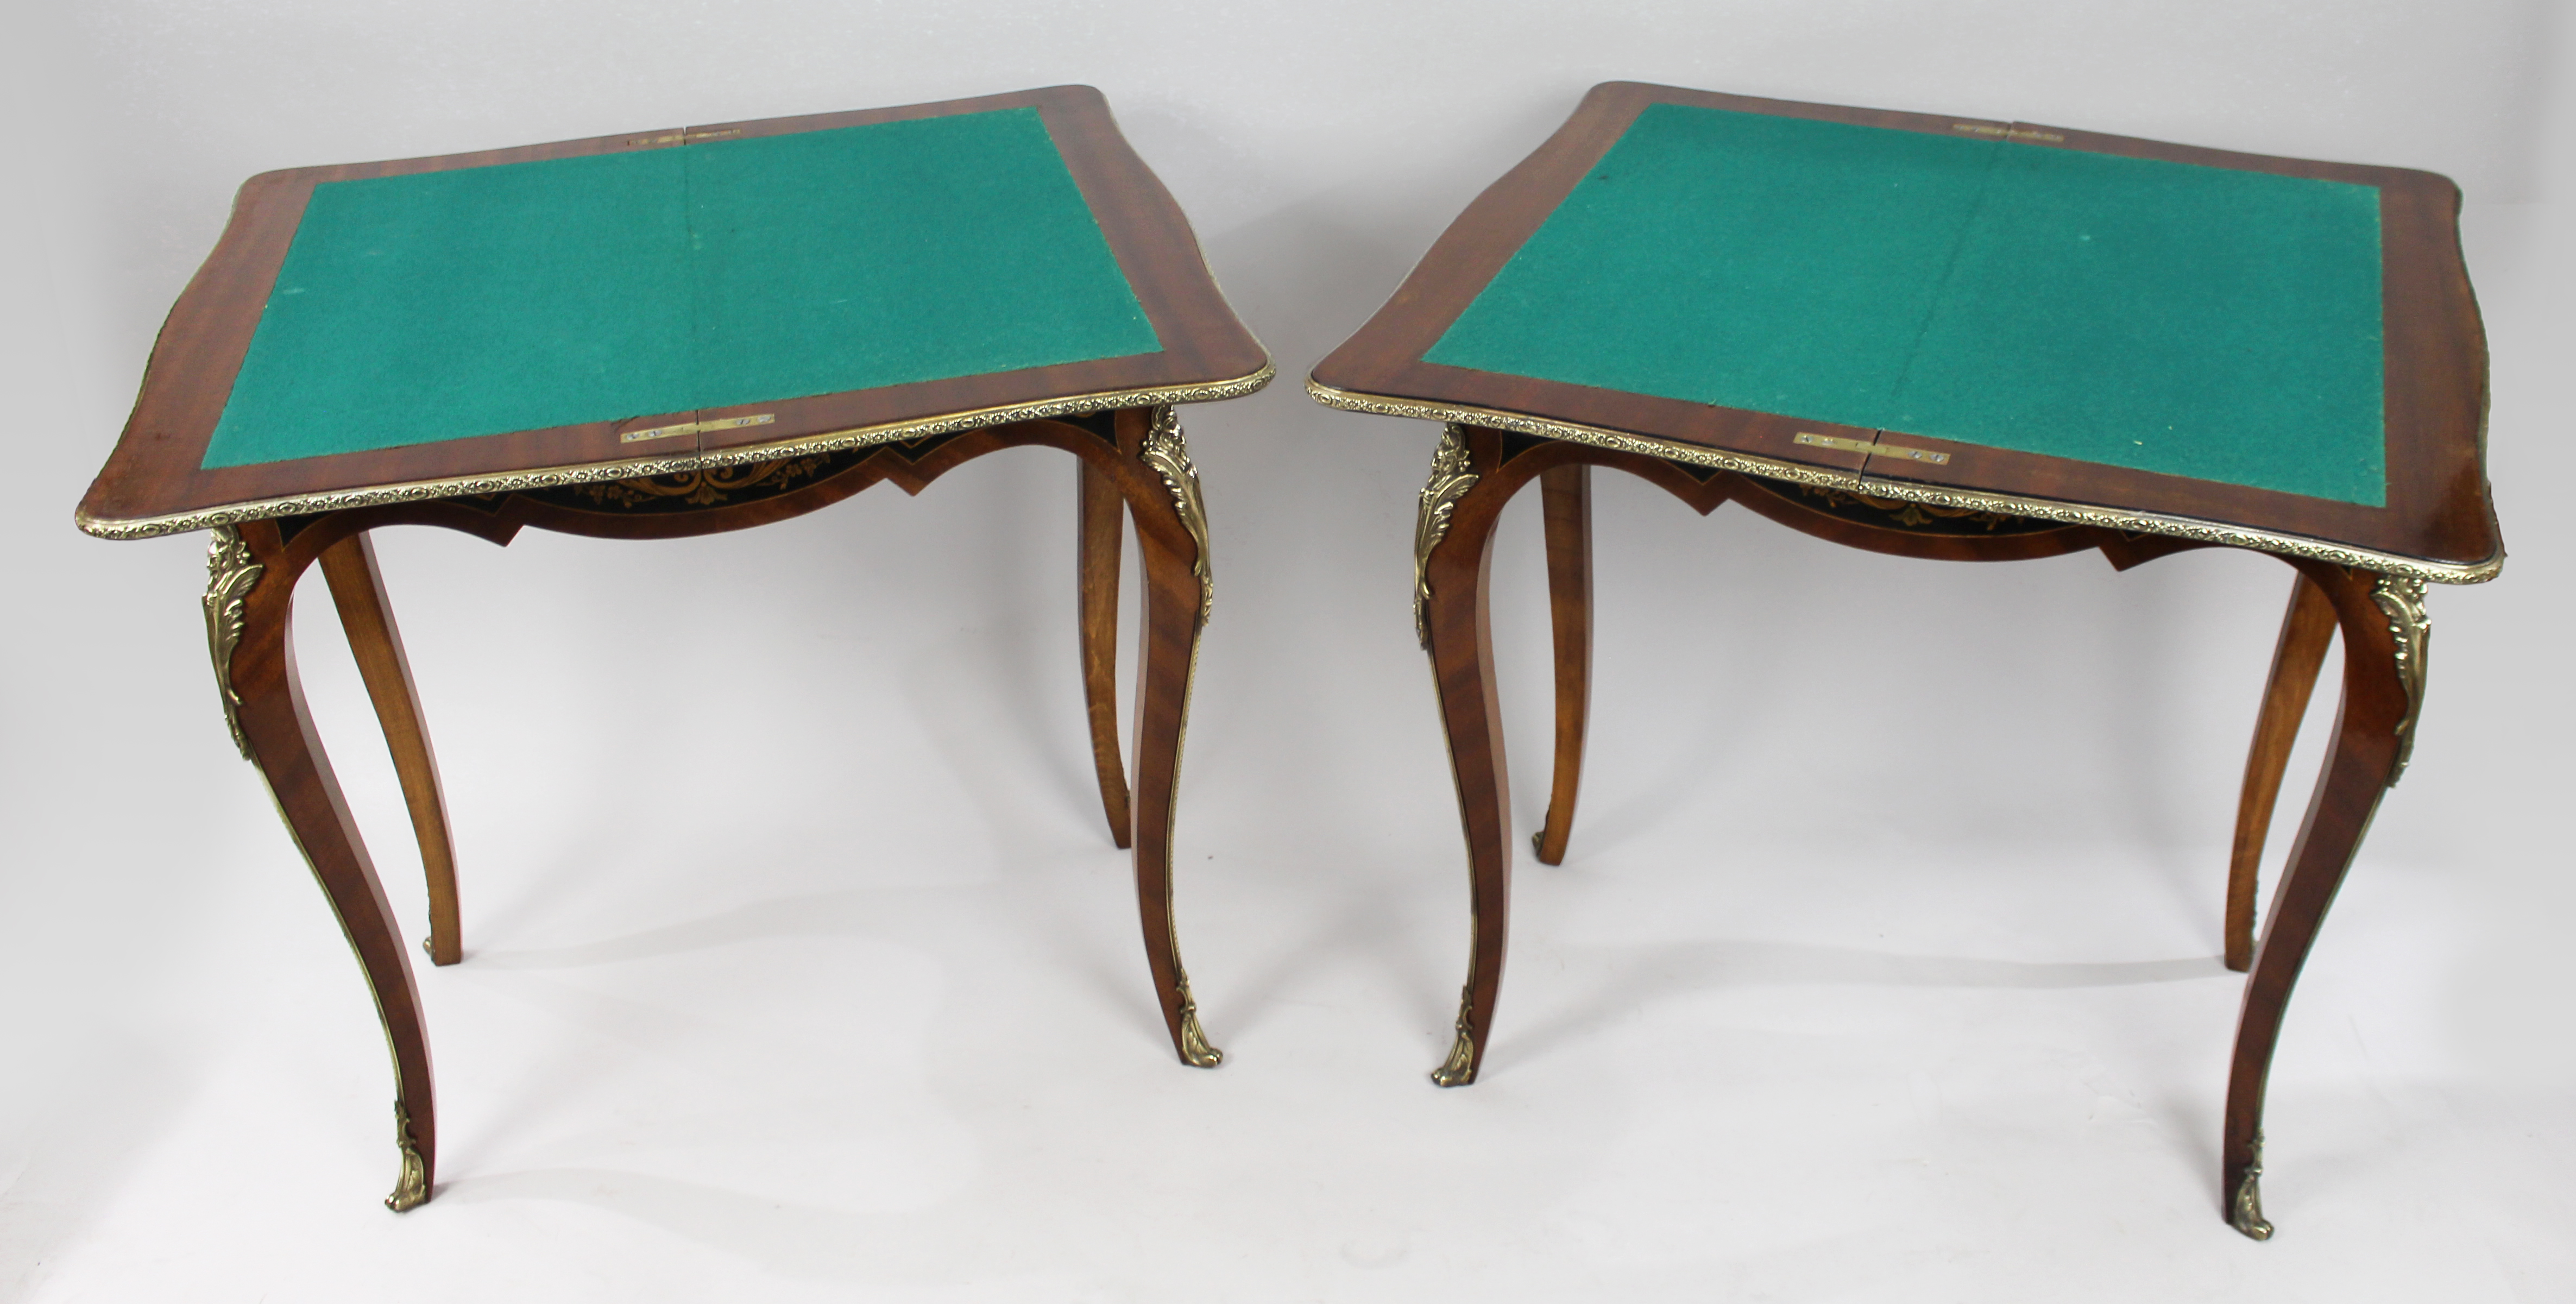 Pair of Marquetry Inlaid 19th c. Card Tables - Image 7 of 7